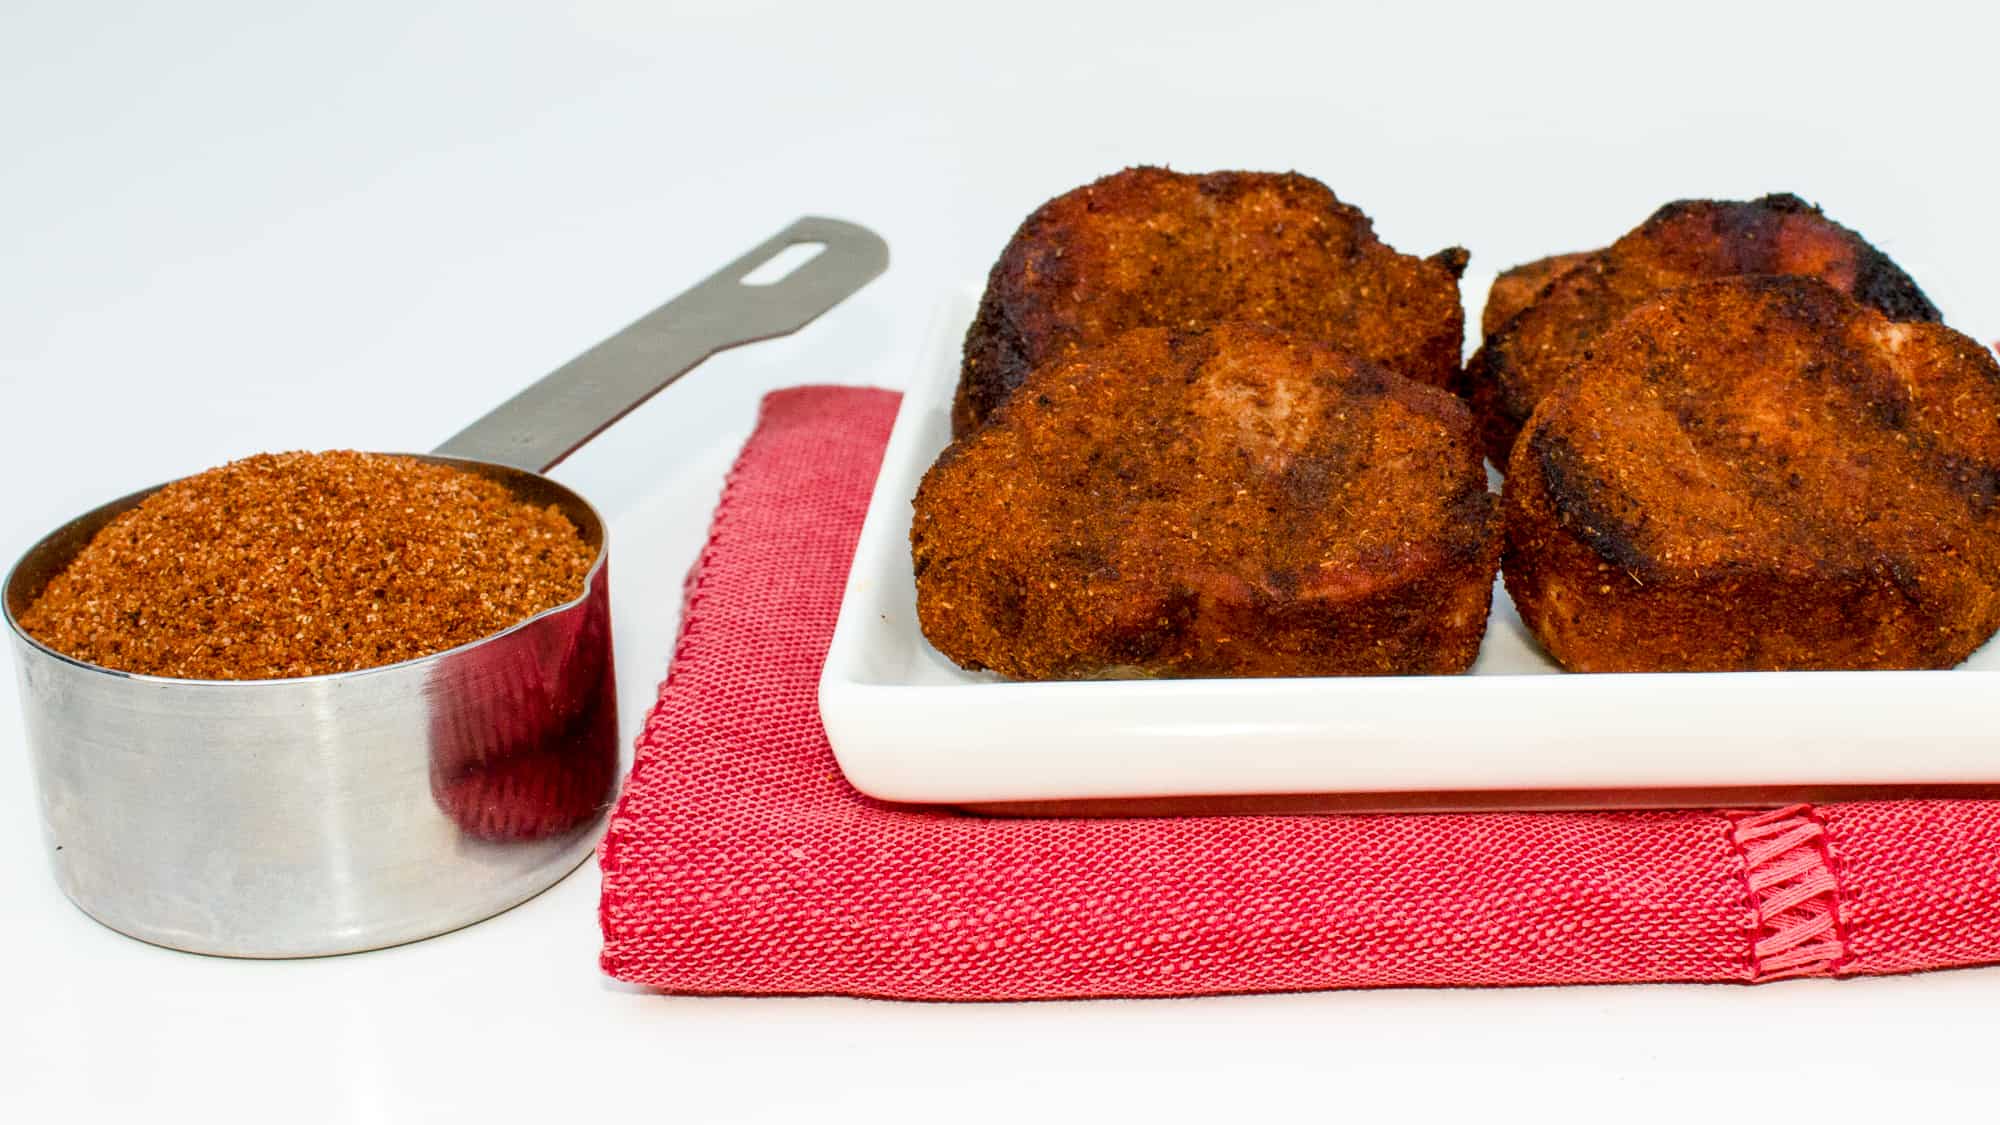 https://www.theblackpeppercorn.com/wp-content/uploads/2012/06/Sweet-and-Smoky-Chipotle-Rub-Facebook.jpg